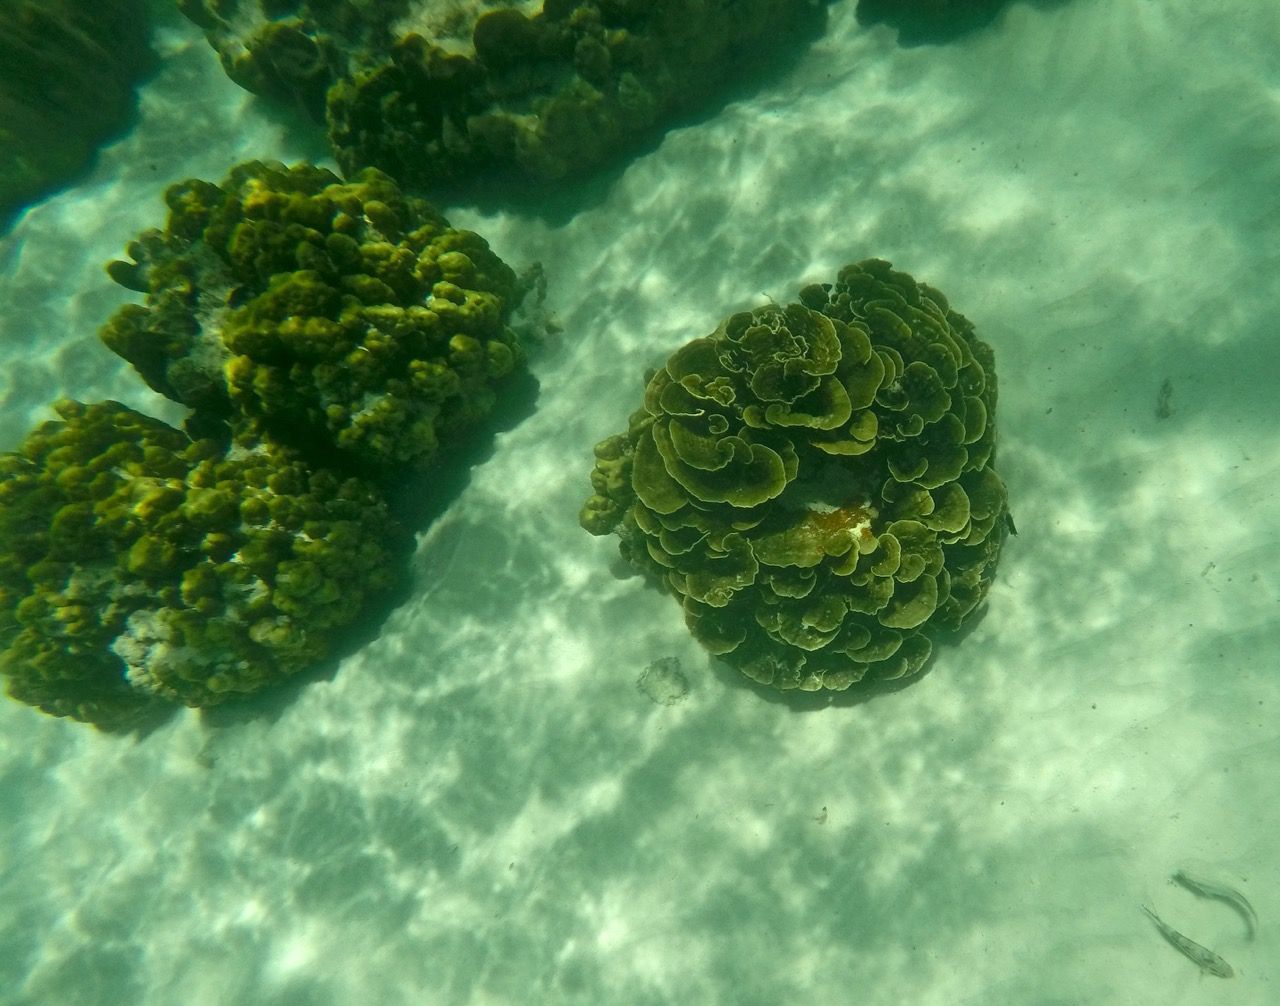 Small, rose-shaped coral.